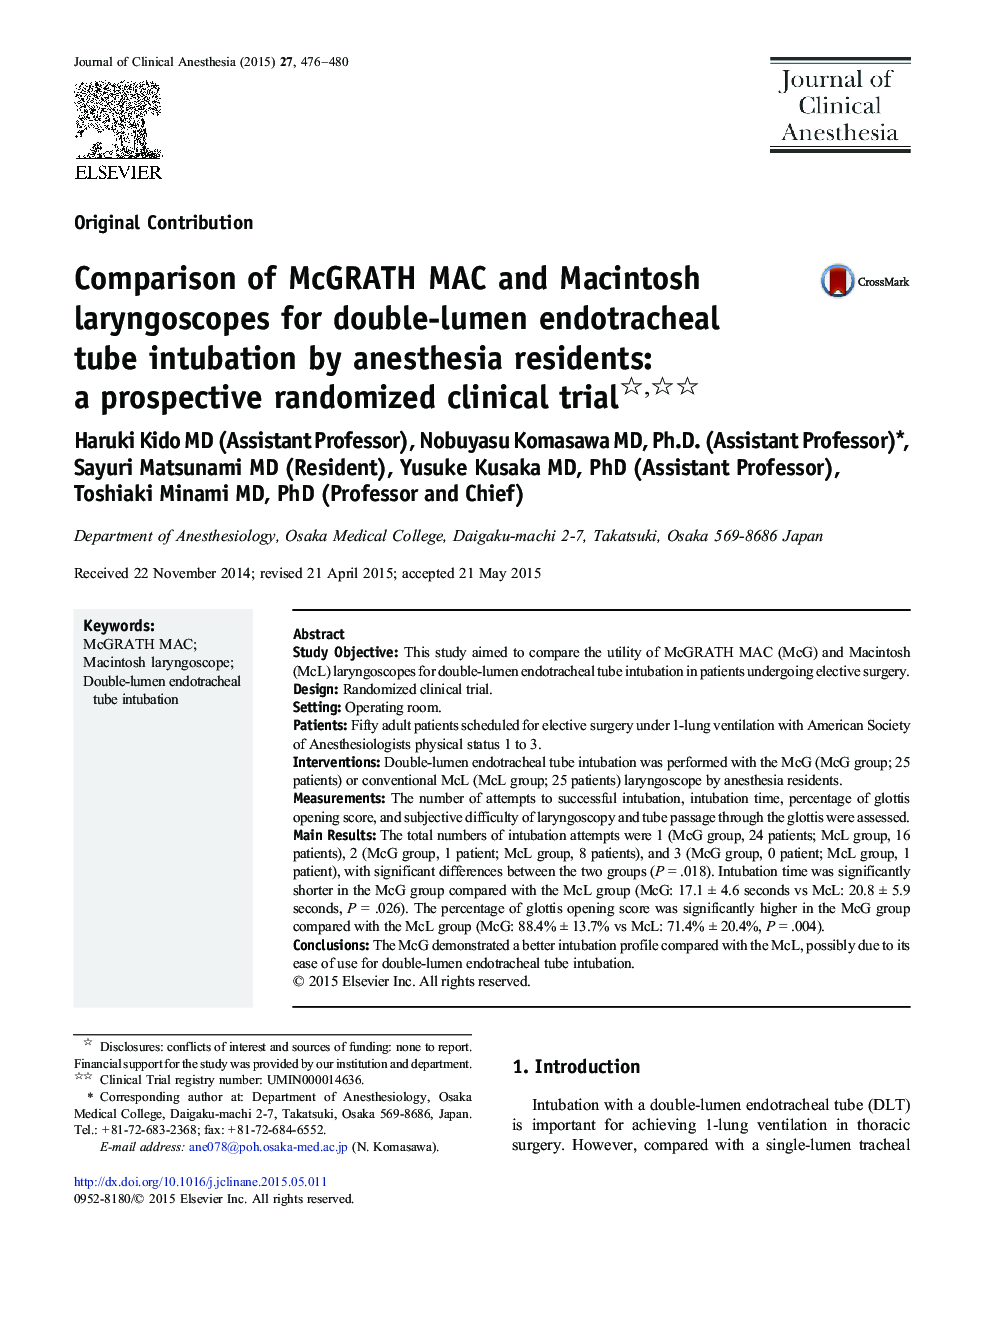 Comparison of McGRATH MAC and Macintosh laryngoscopes for double-lumen endotracheal tube intubation by anesthesia residents: a prospective randomized clinical trial 